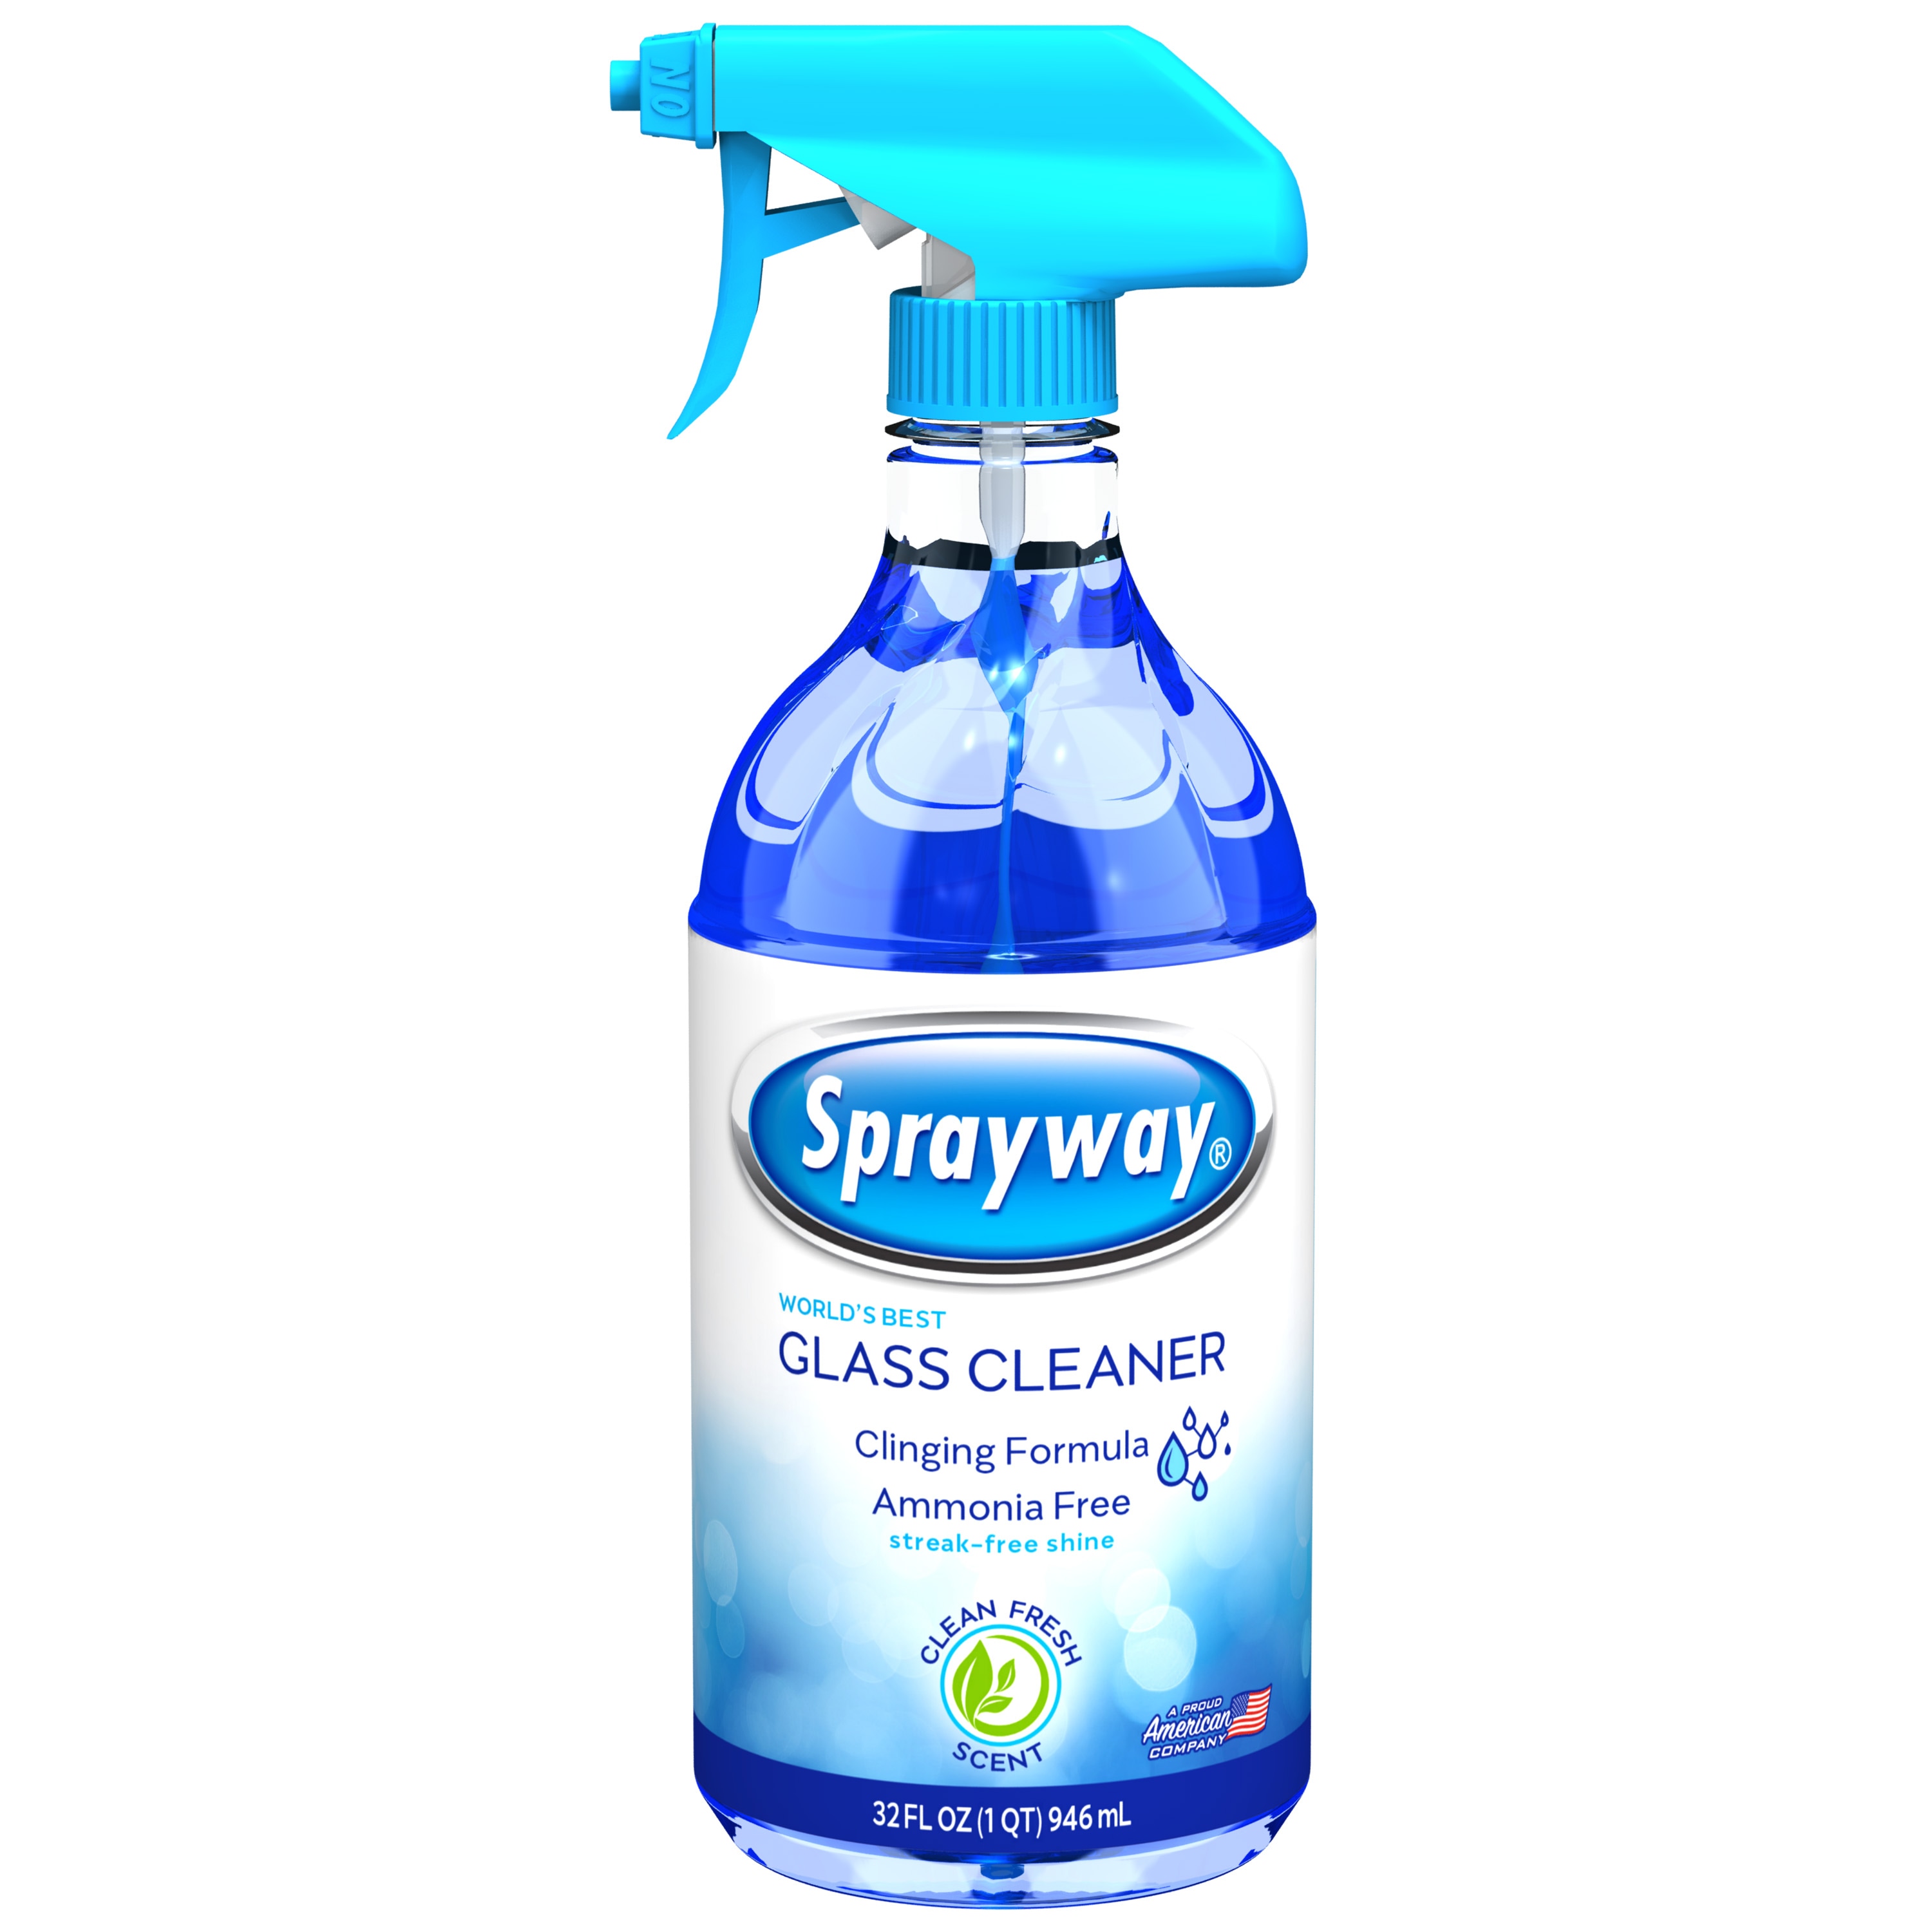 Foaming Glass Cleaner by Spray-X Industrial Strength